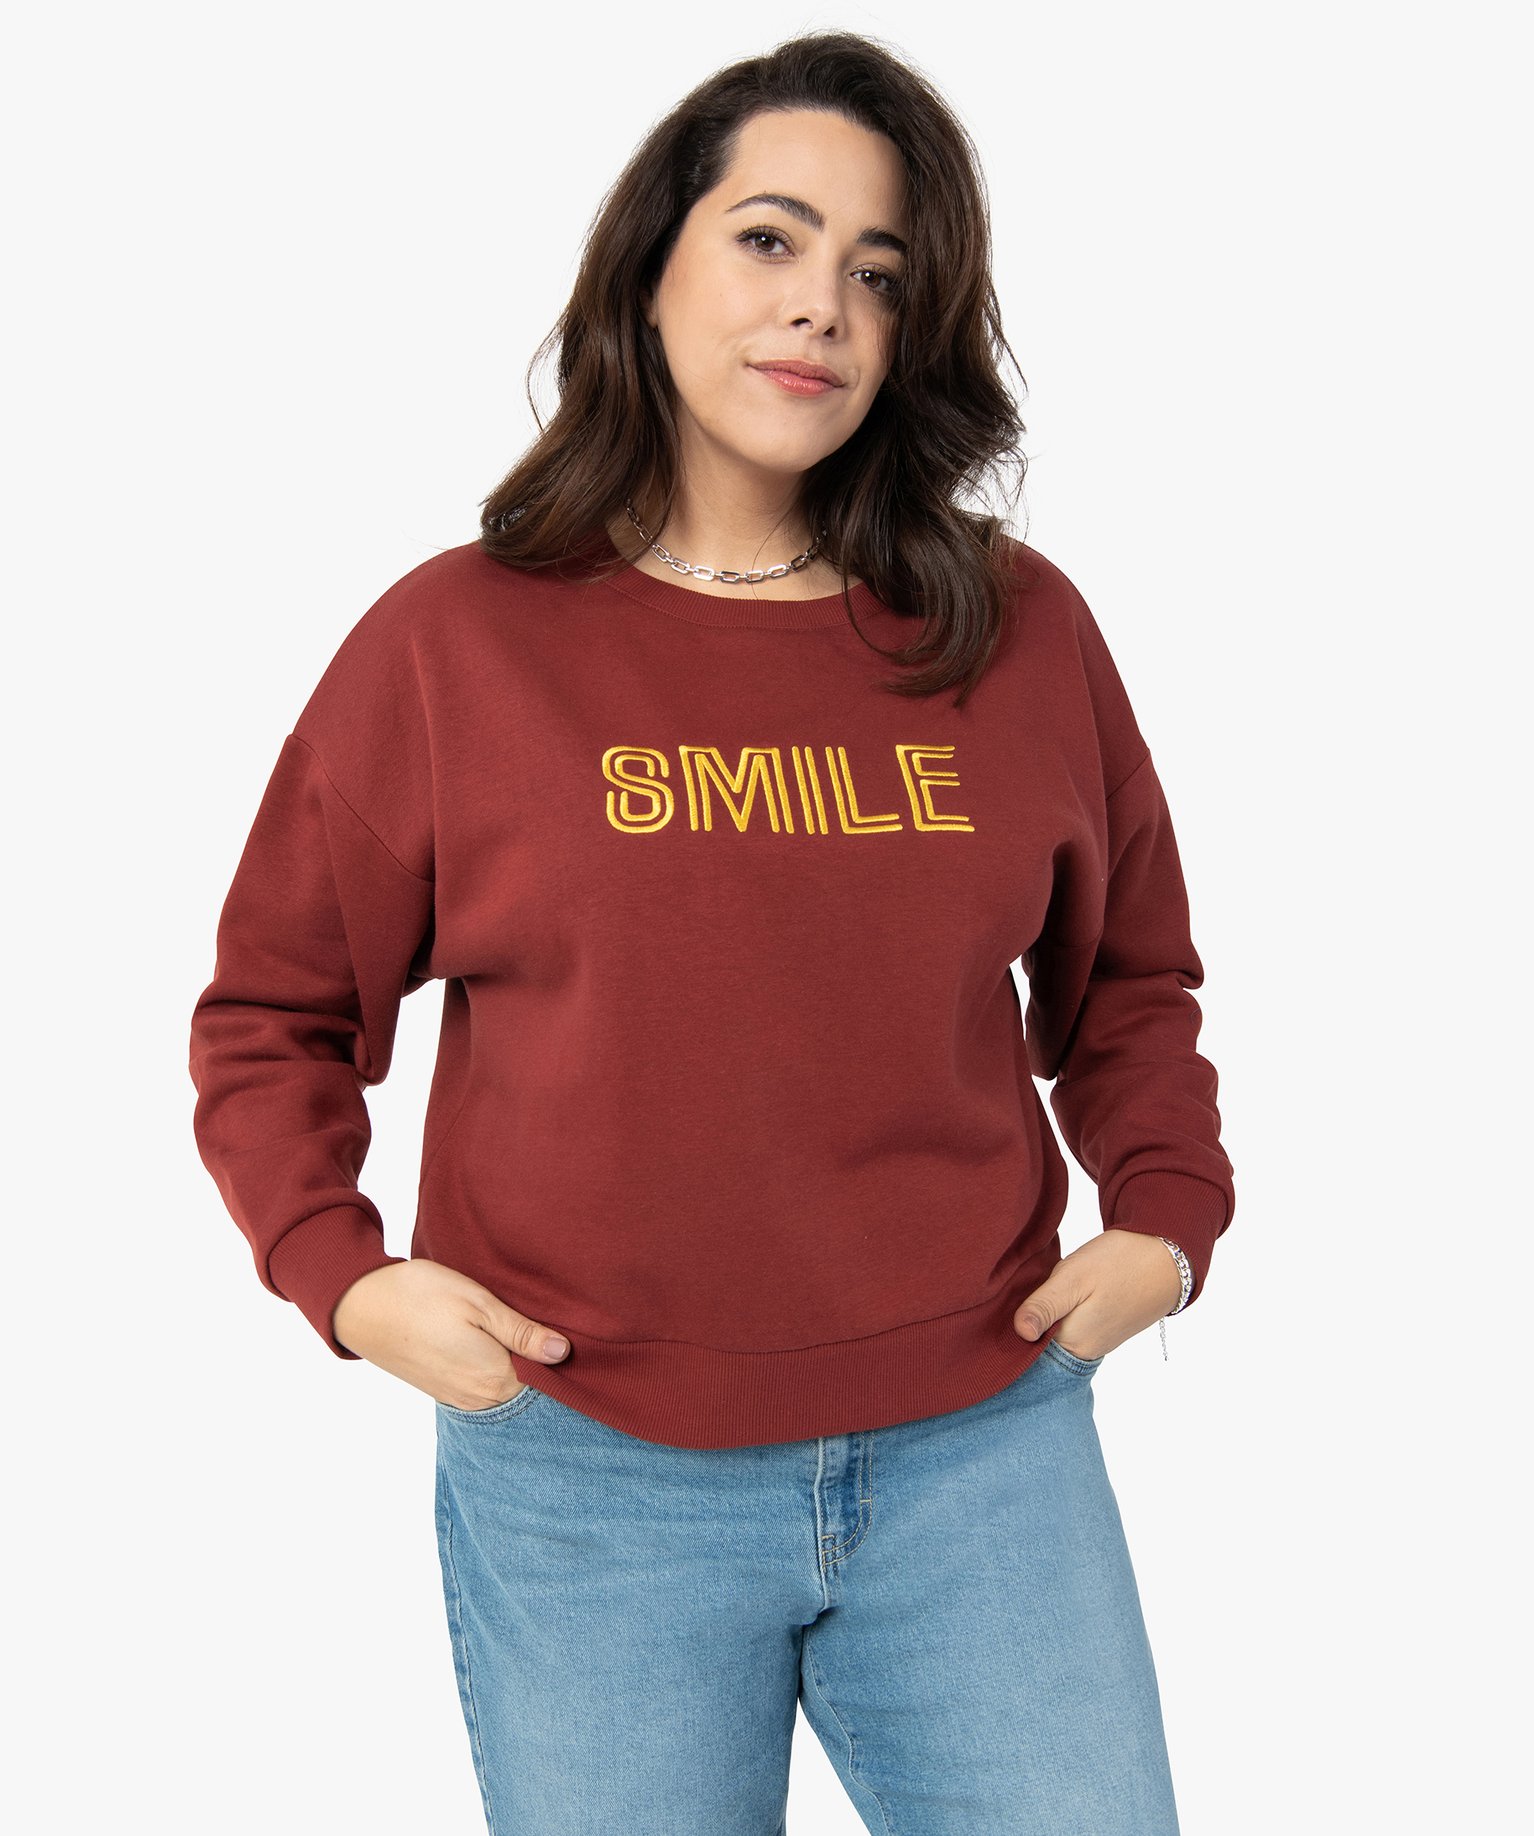 sweat femme grande taille court avec message brode rouge